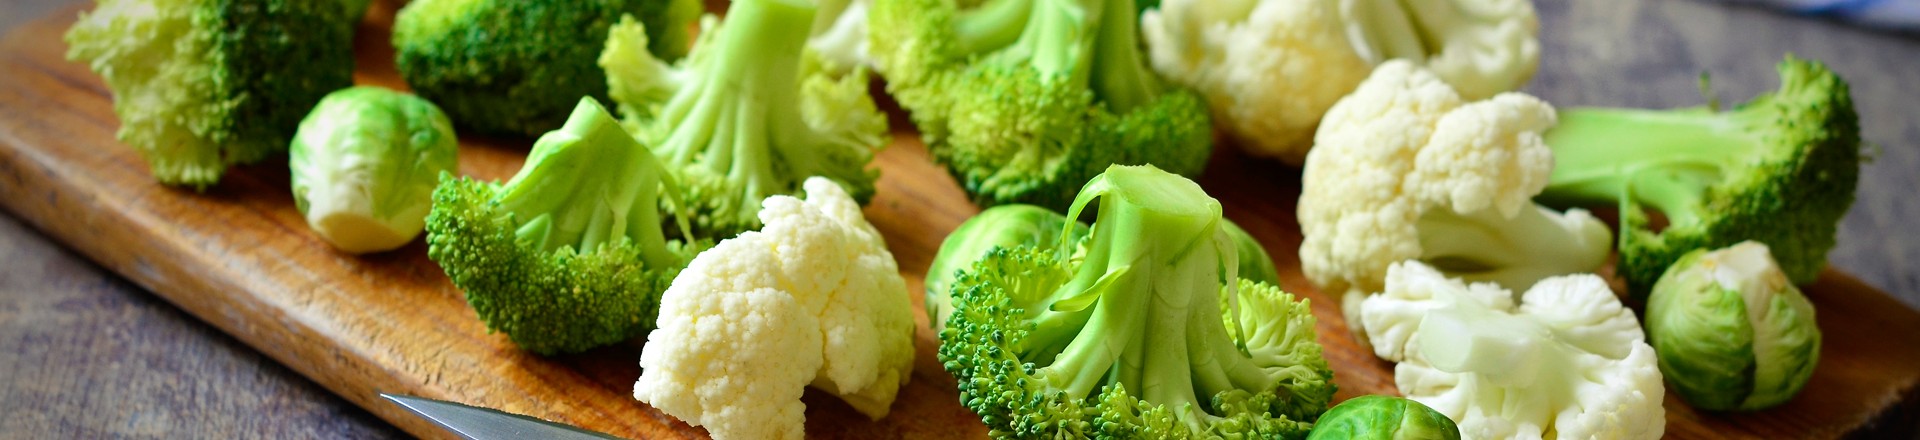 broccoli, cauliflower, and Brussels sprouts